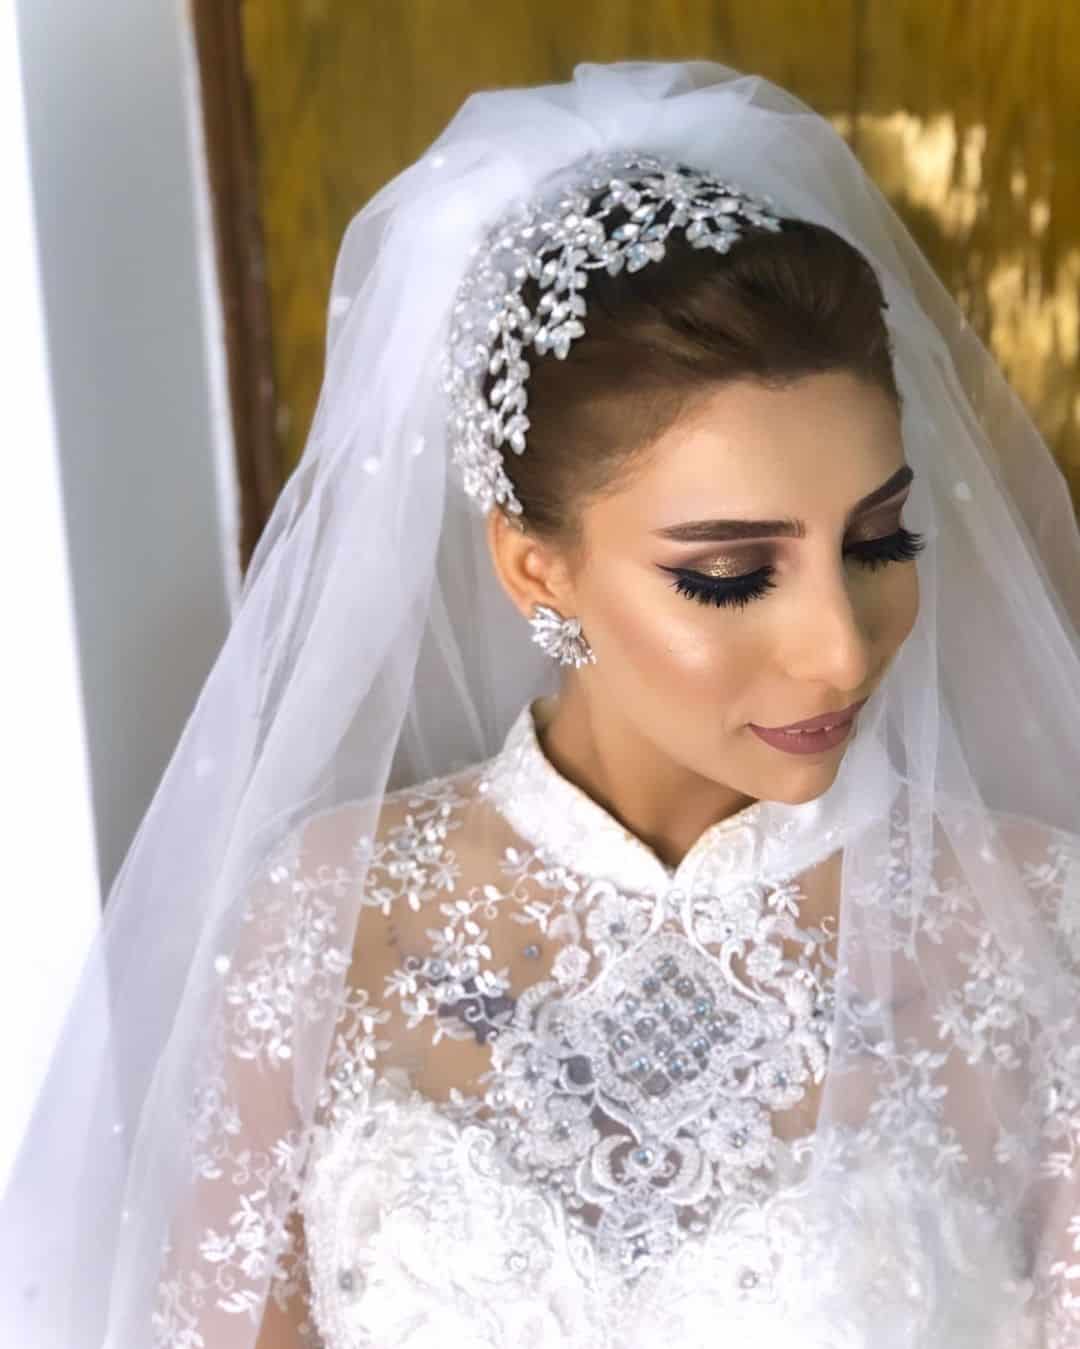 Wedding Hairstyle With Veil And A White Crown 